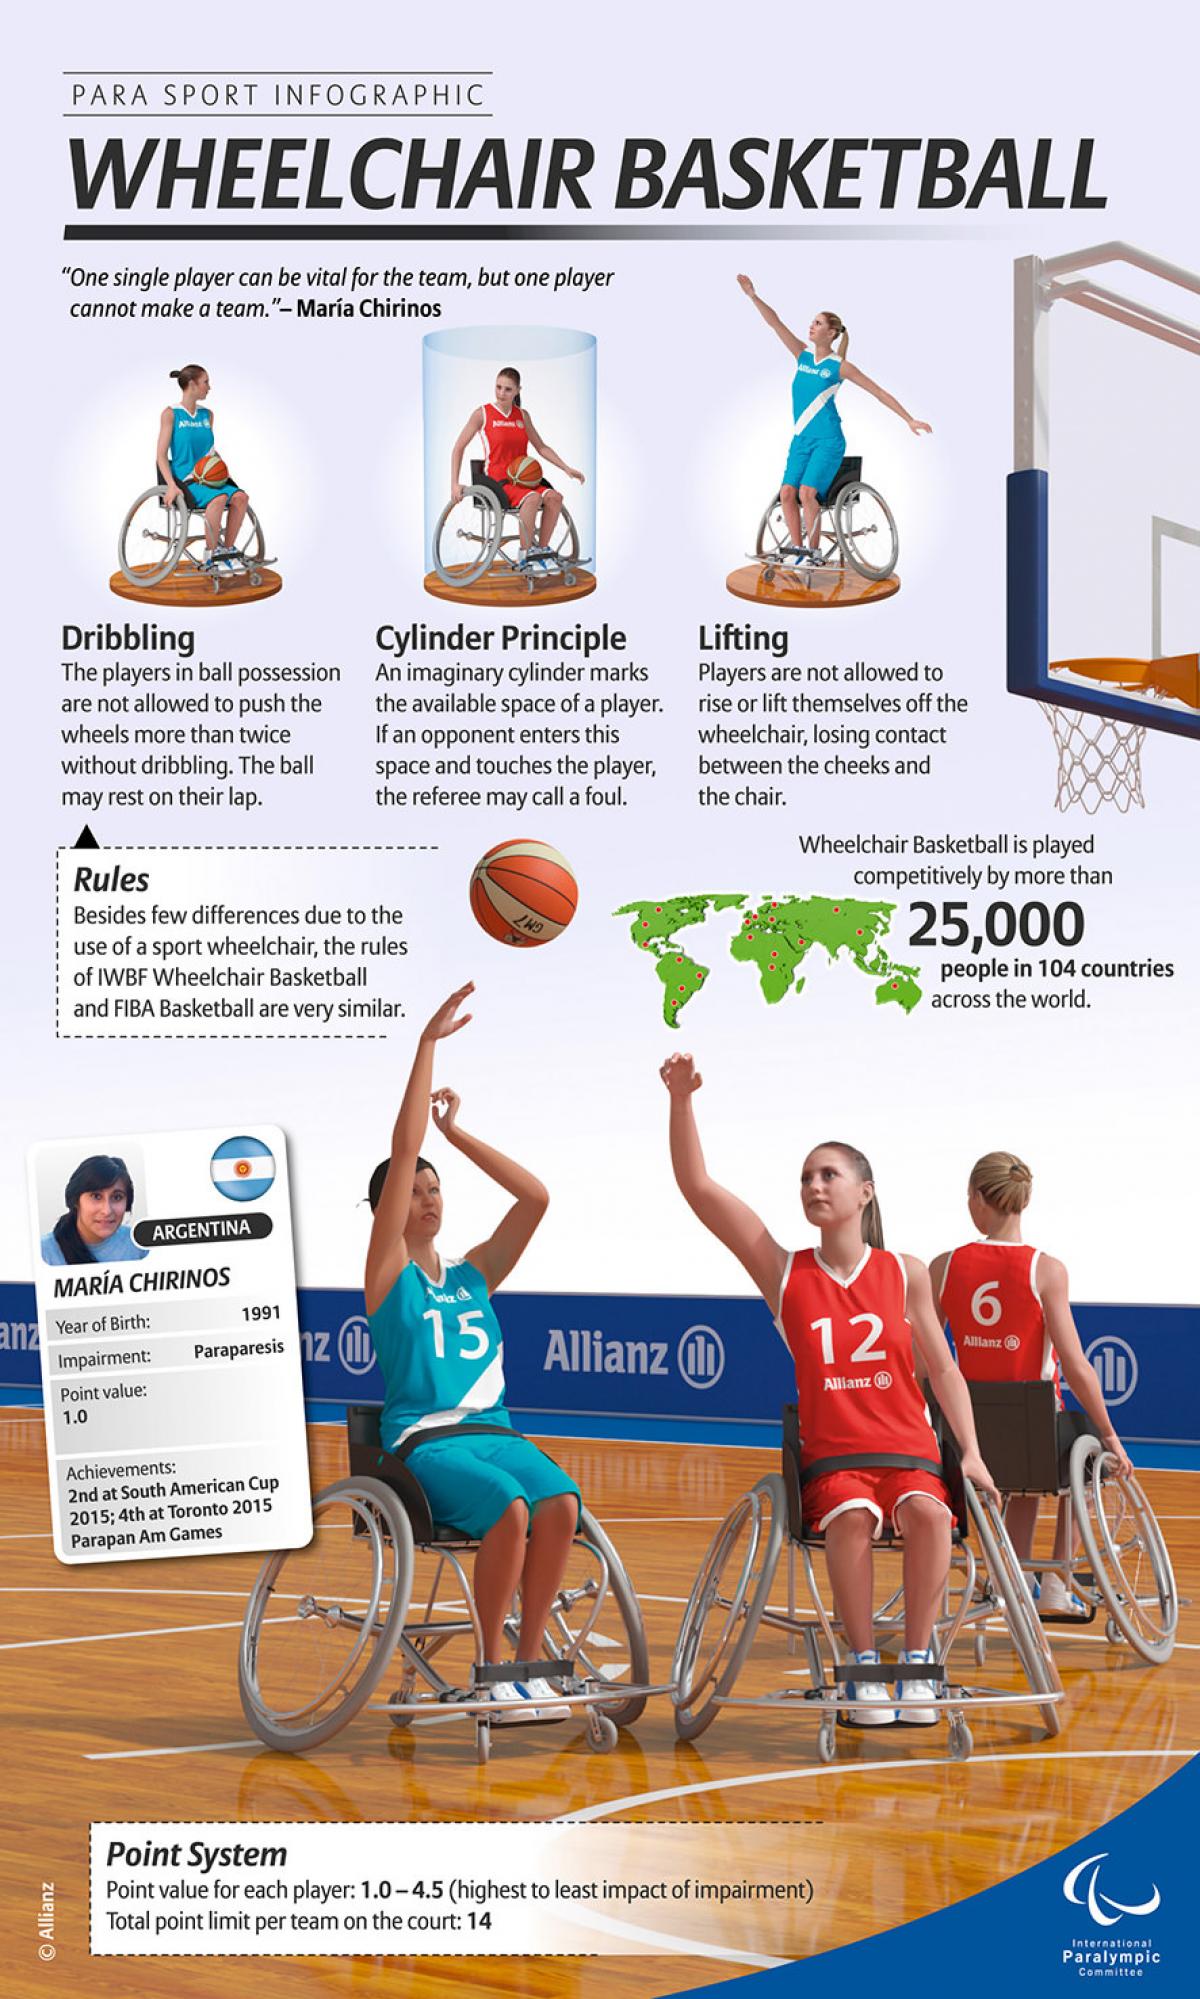 Allianz Para Sport Infographics on Wheelchair Basketball explains the sport including its classification points system, rules and an athlete's quote by Australian athlete Bridie Kean.